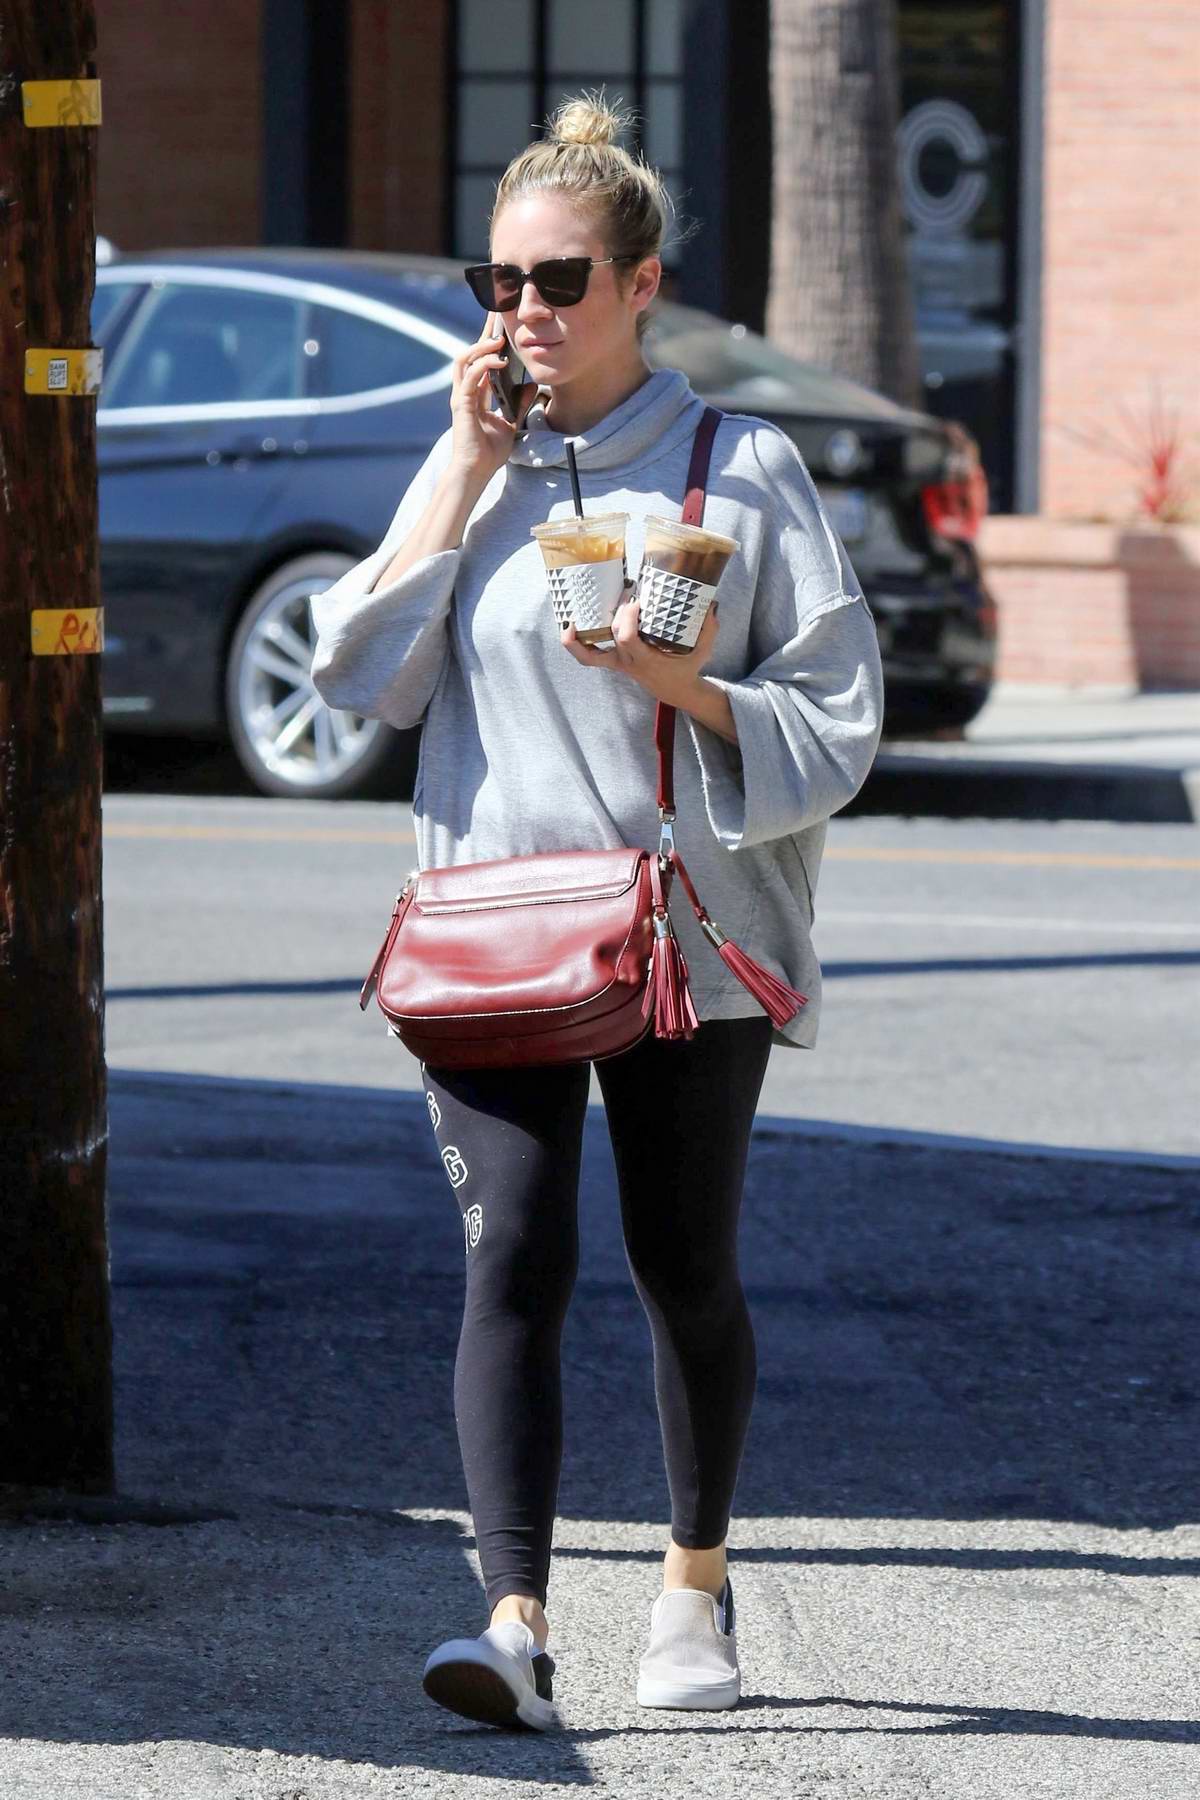 https://www.celebsfirst.com/wp-content/uploads/2018/08/brittany-snow-steps-out-in-grey-sweatshirt-and-black-leggings-as-she-makes-a-coffee-run-in-studio-city-los-angeles-290818_3.jpg